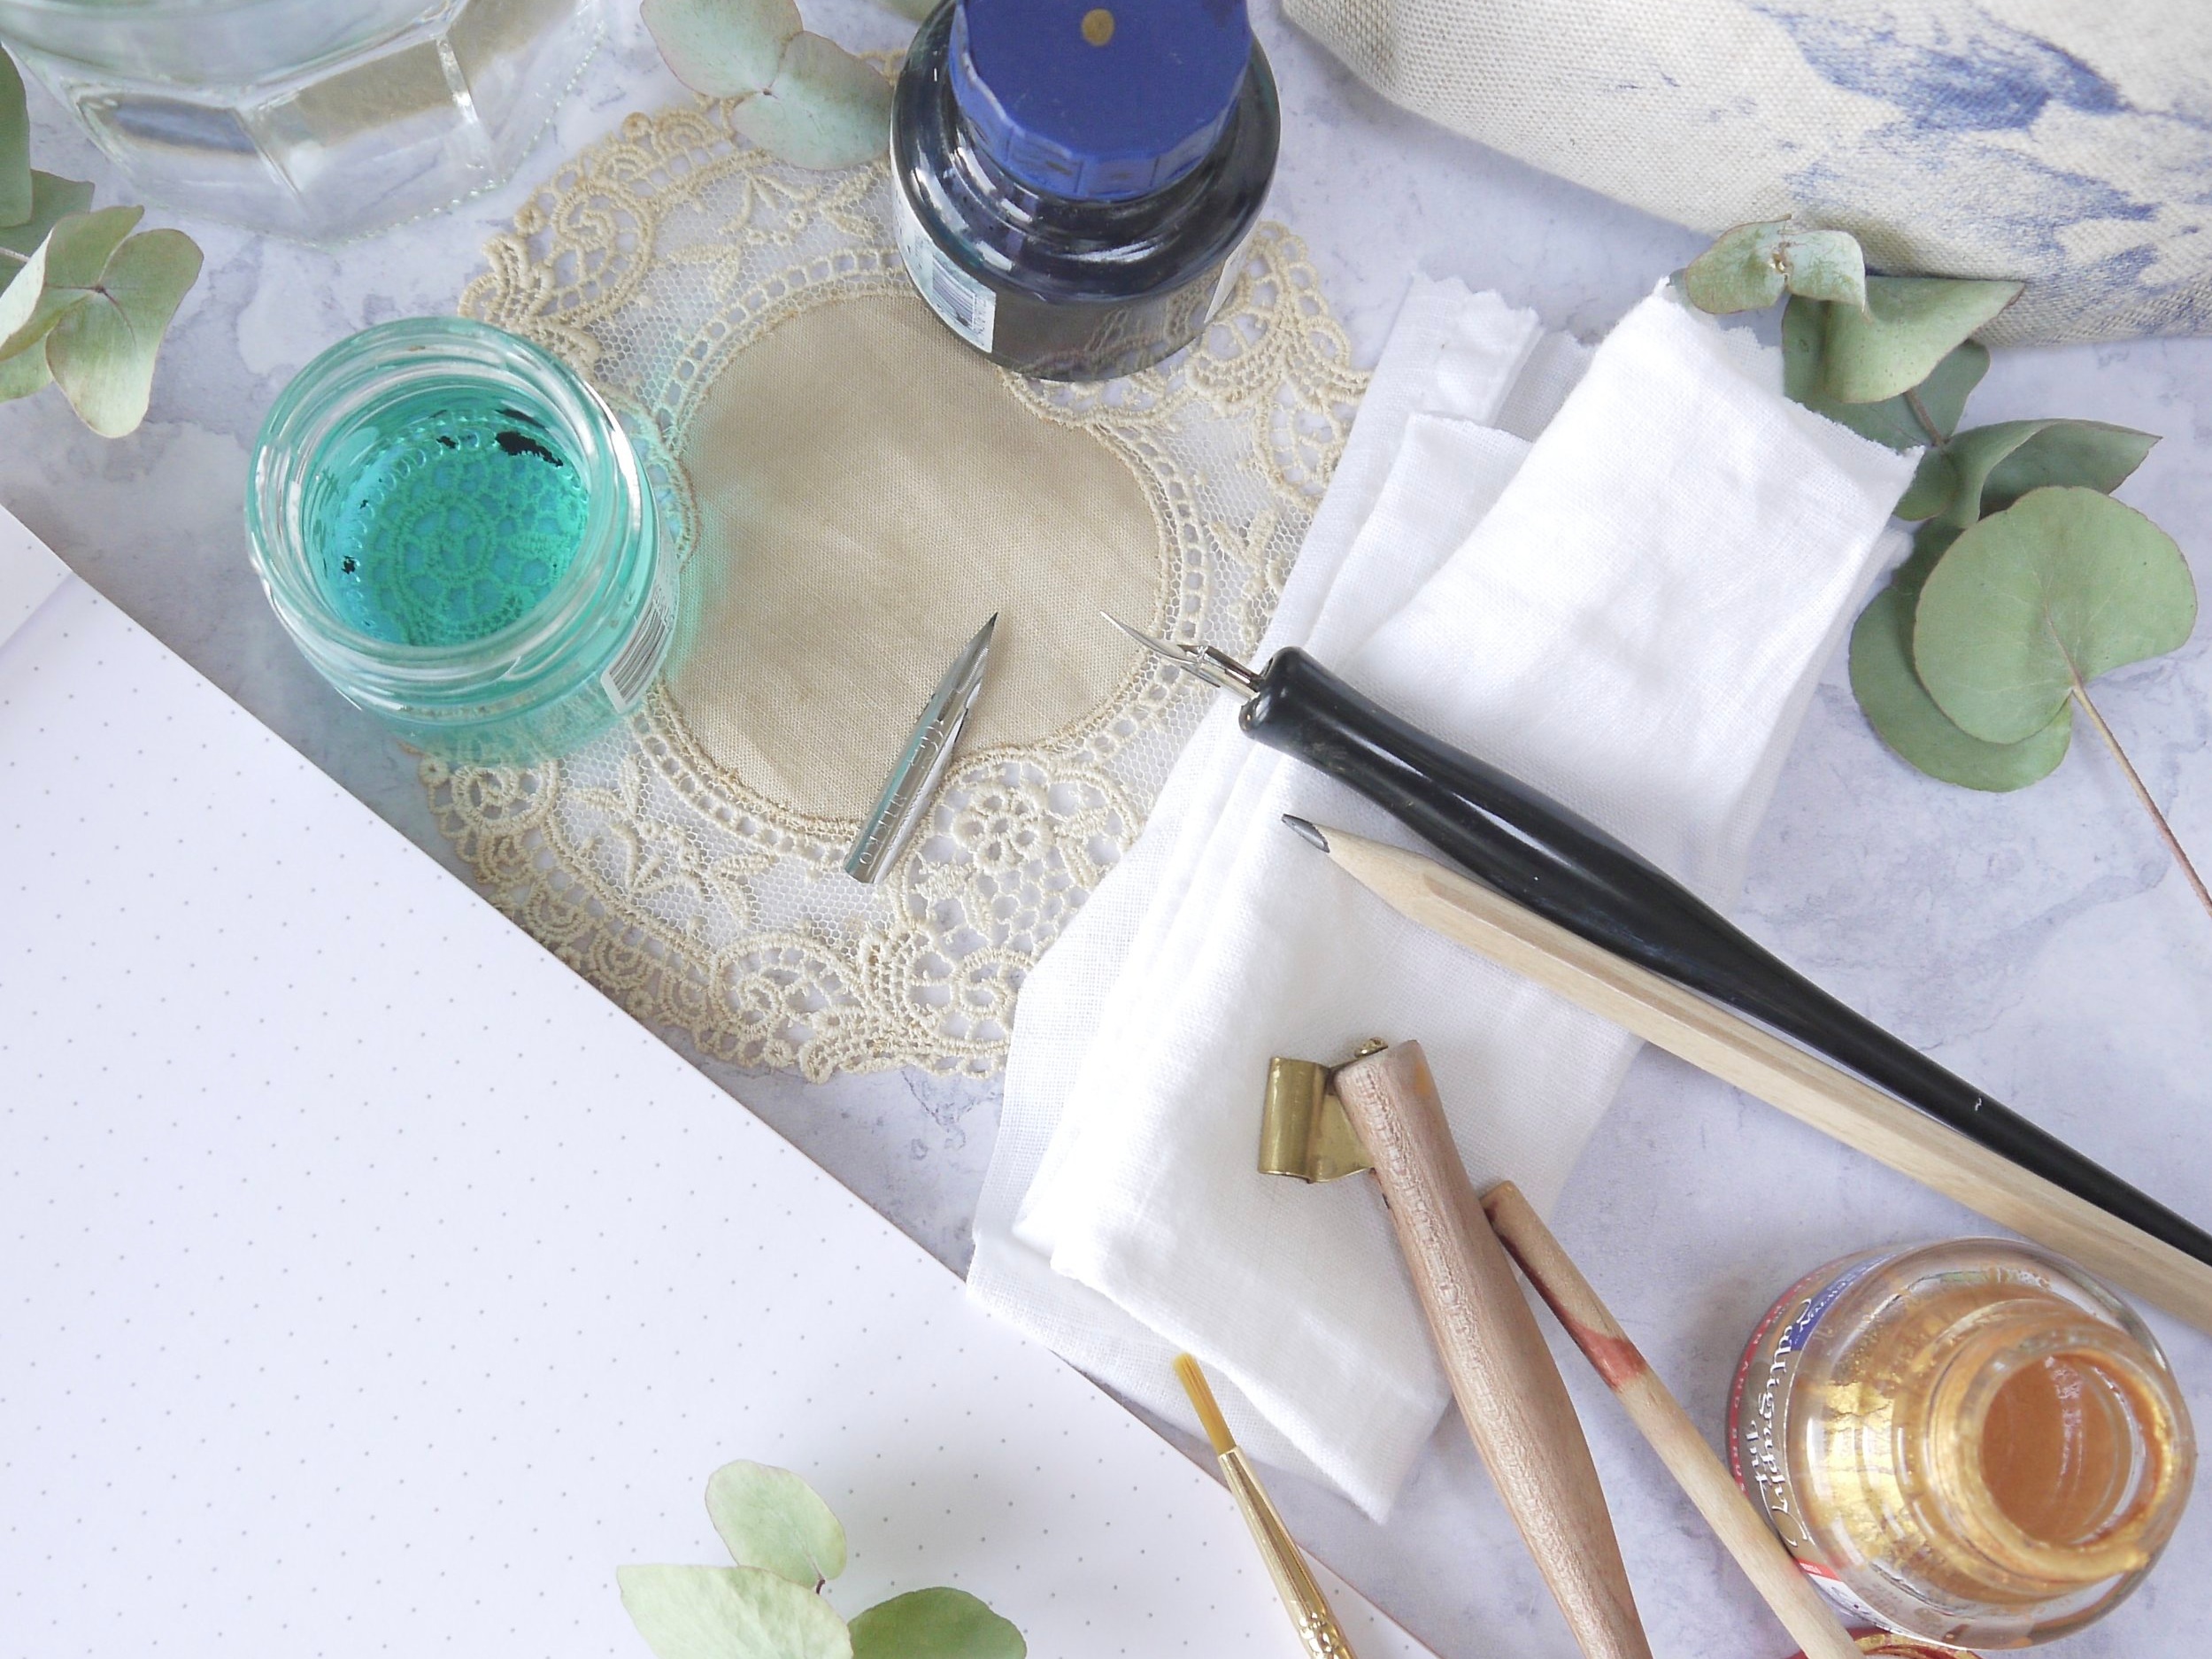 Getting Started with Modern Calligraphy {The Materials}